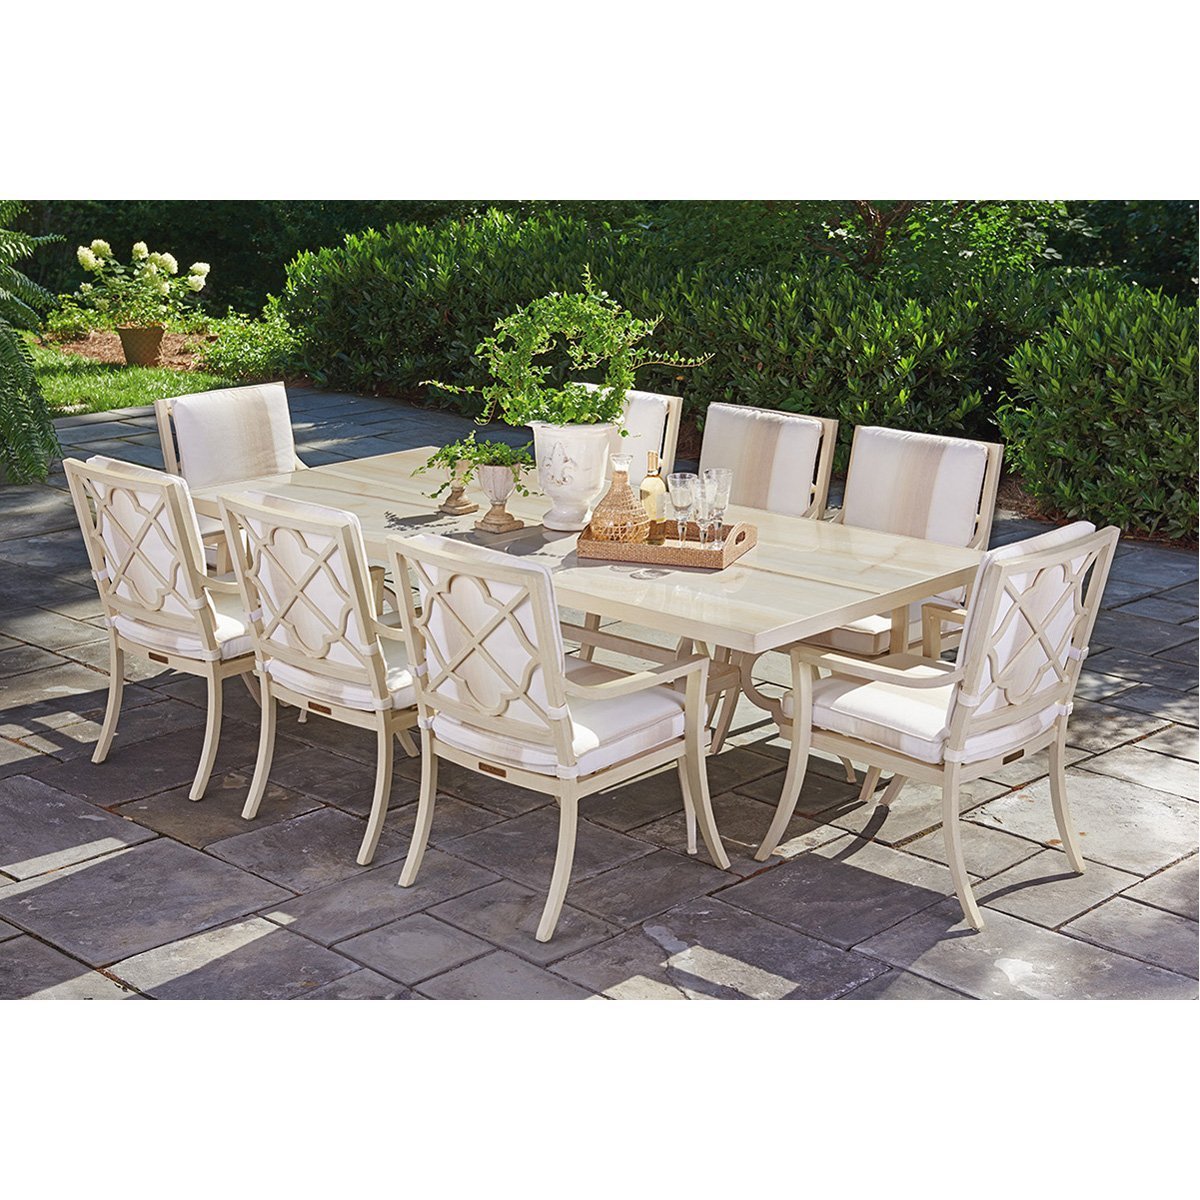 Tommy Bahama Misty Garden Dining Table with Porcelain Top